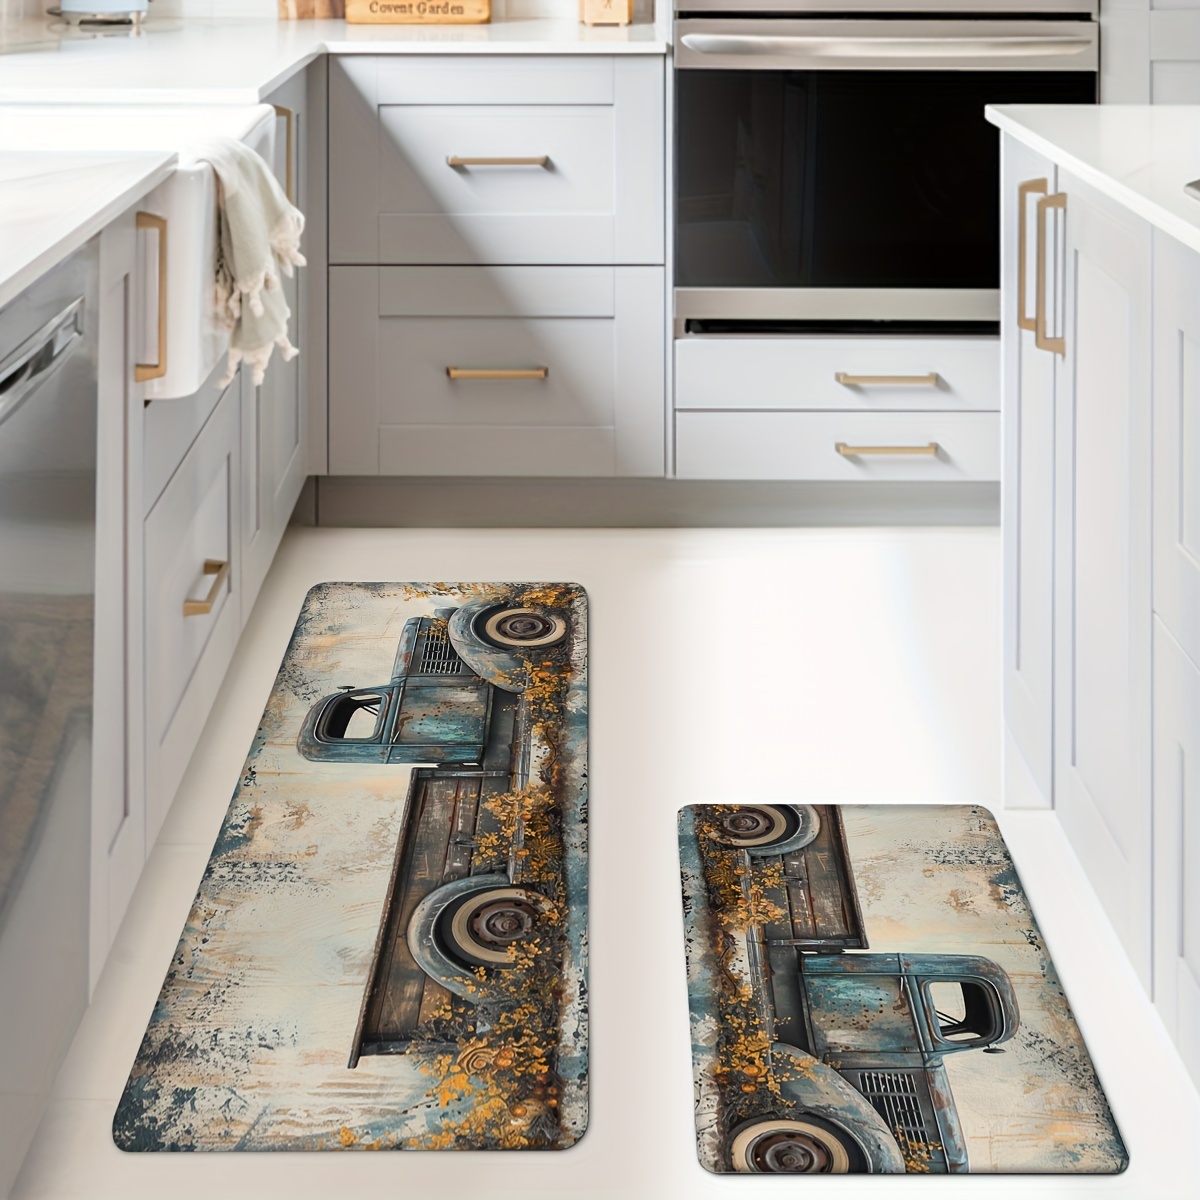 

1pc/2pcs, Truck Print Kitchen Mats, Non-slip And Durable Bathroom Pads For Floor, Comfortable Standing Runner Rugs, Carpets For Kitchen, Home, Office, Laundry Room, Bathroom, Spring Decor